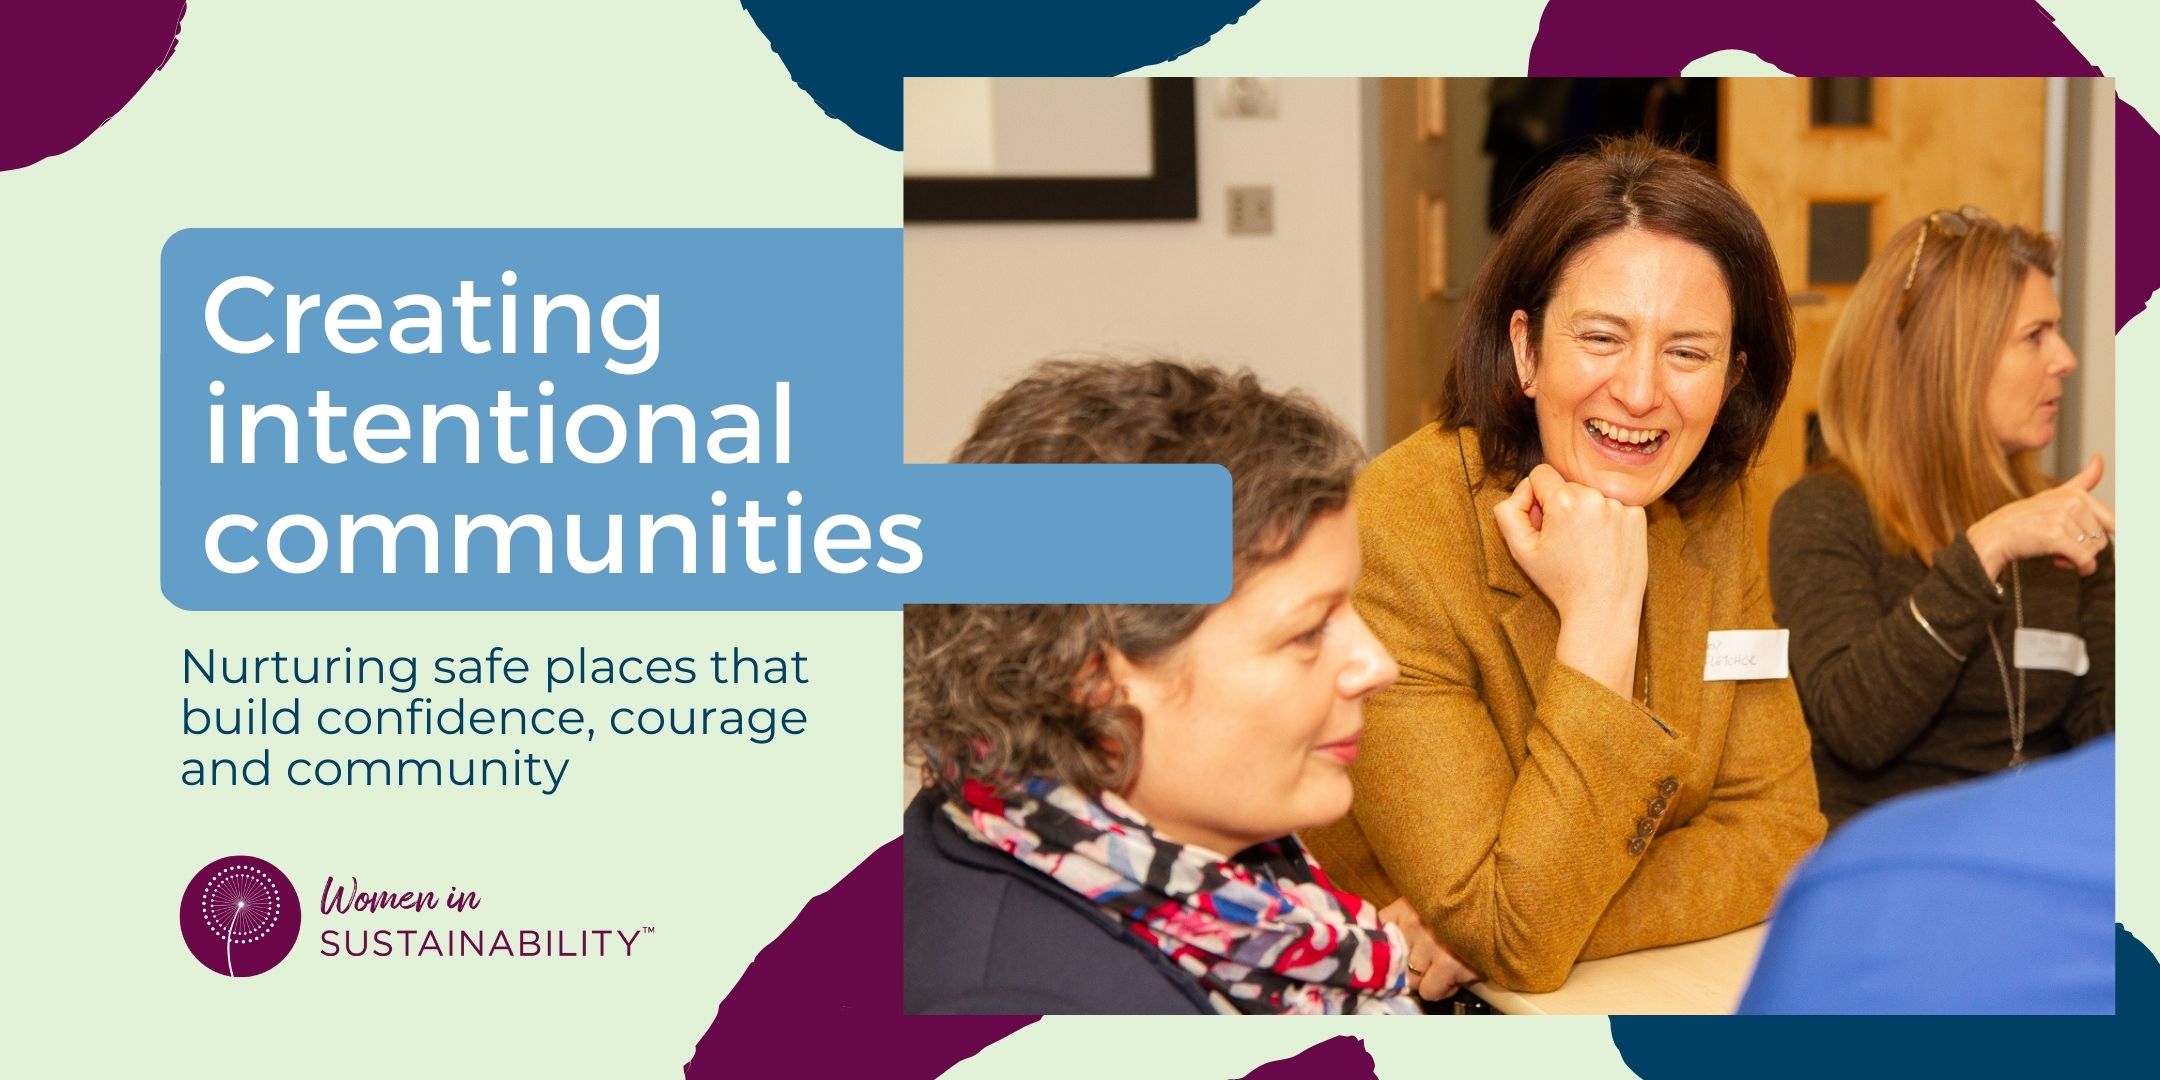 Creating intentional communities for women that provide psychologically safe places to nurture confidence, courage and community to lead and be a force for good.